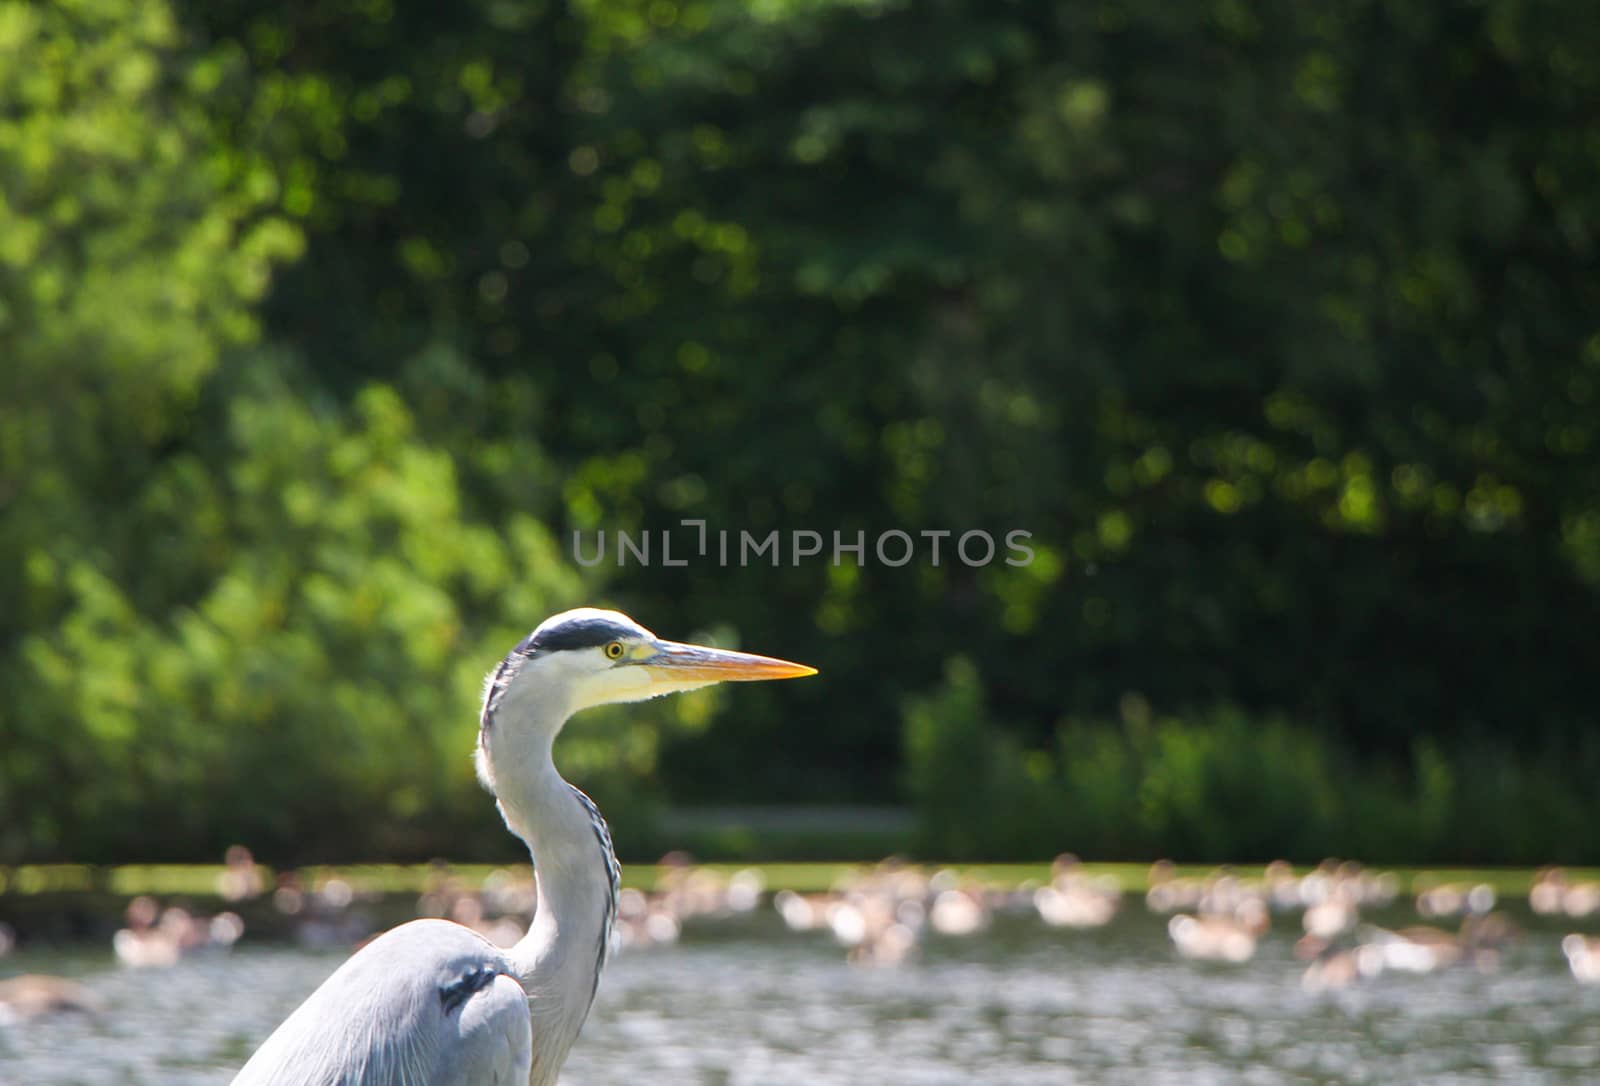 Grey heron standing in front of a lake with geese.